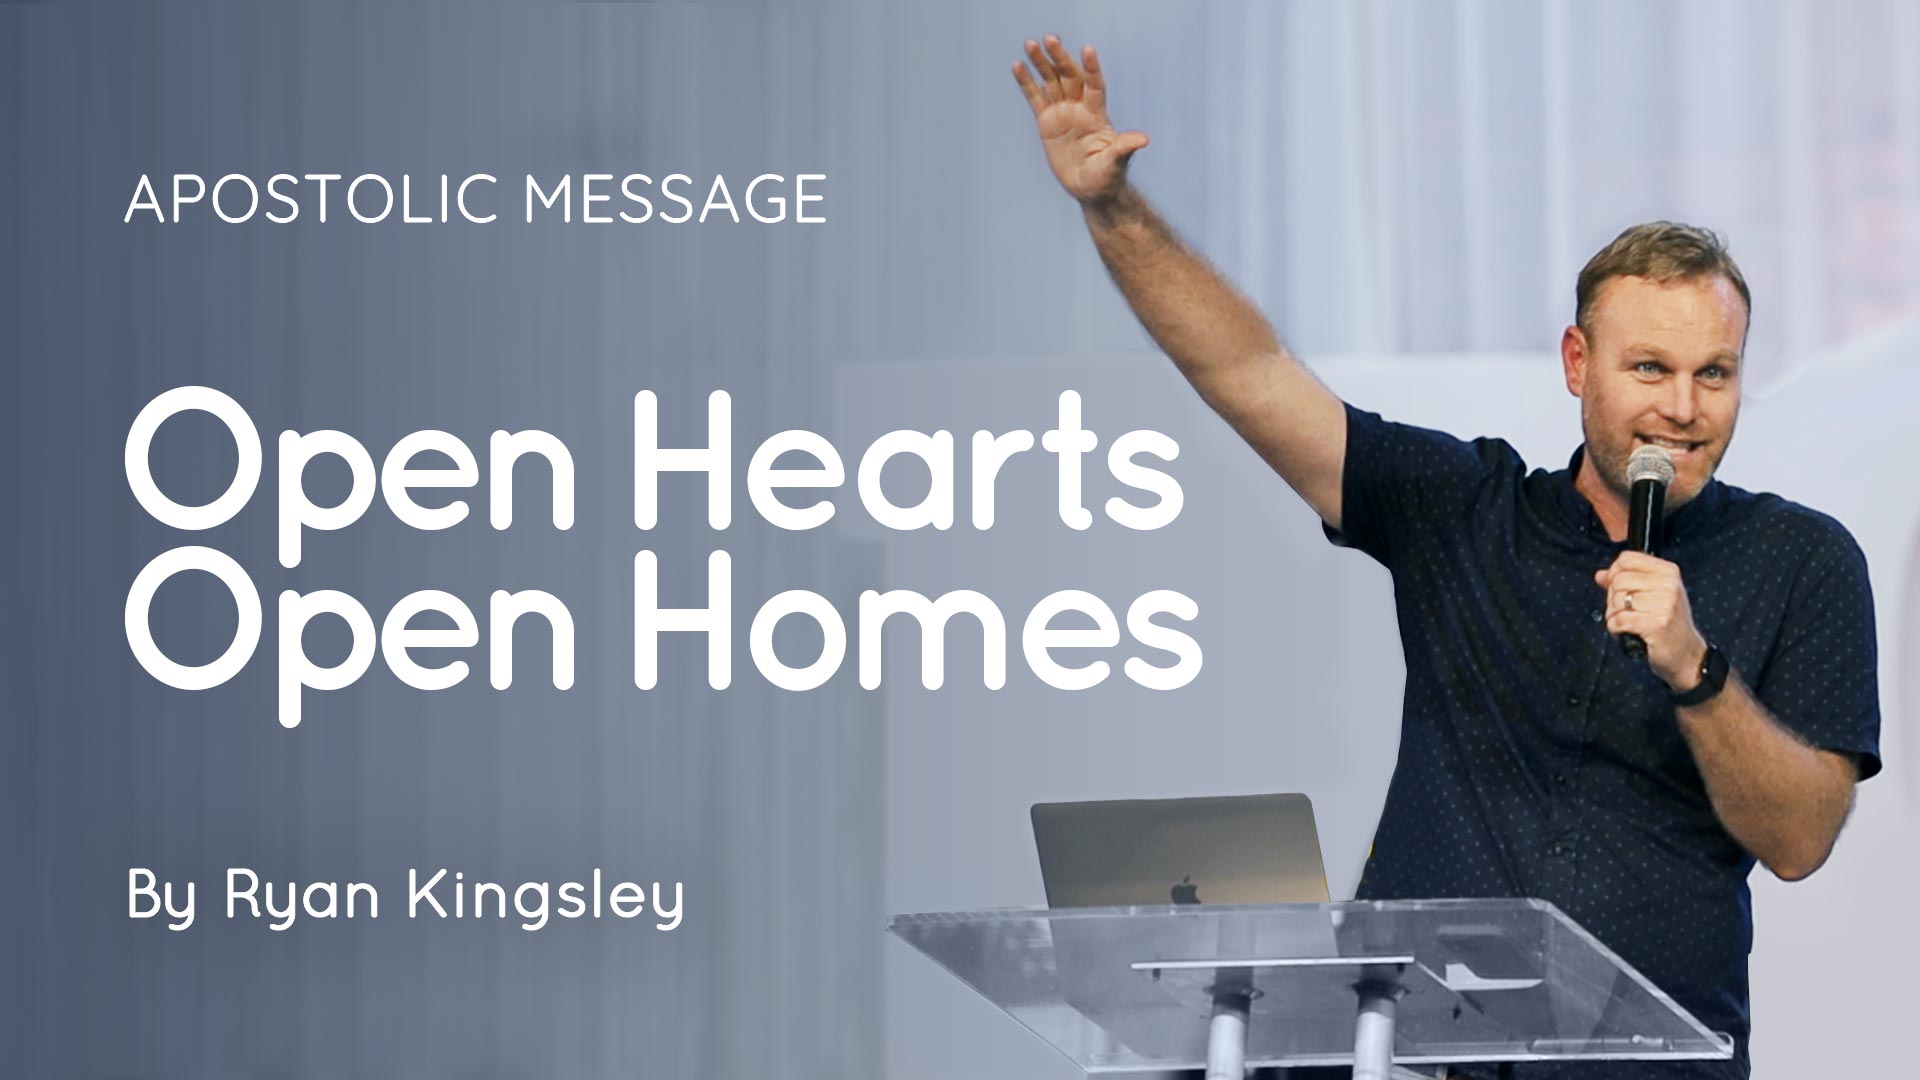 Video image for 'Open Hearts, Open Homes’ about opening our homes to build family and make disciples